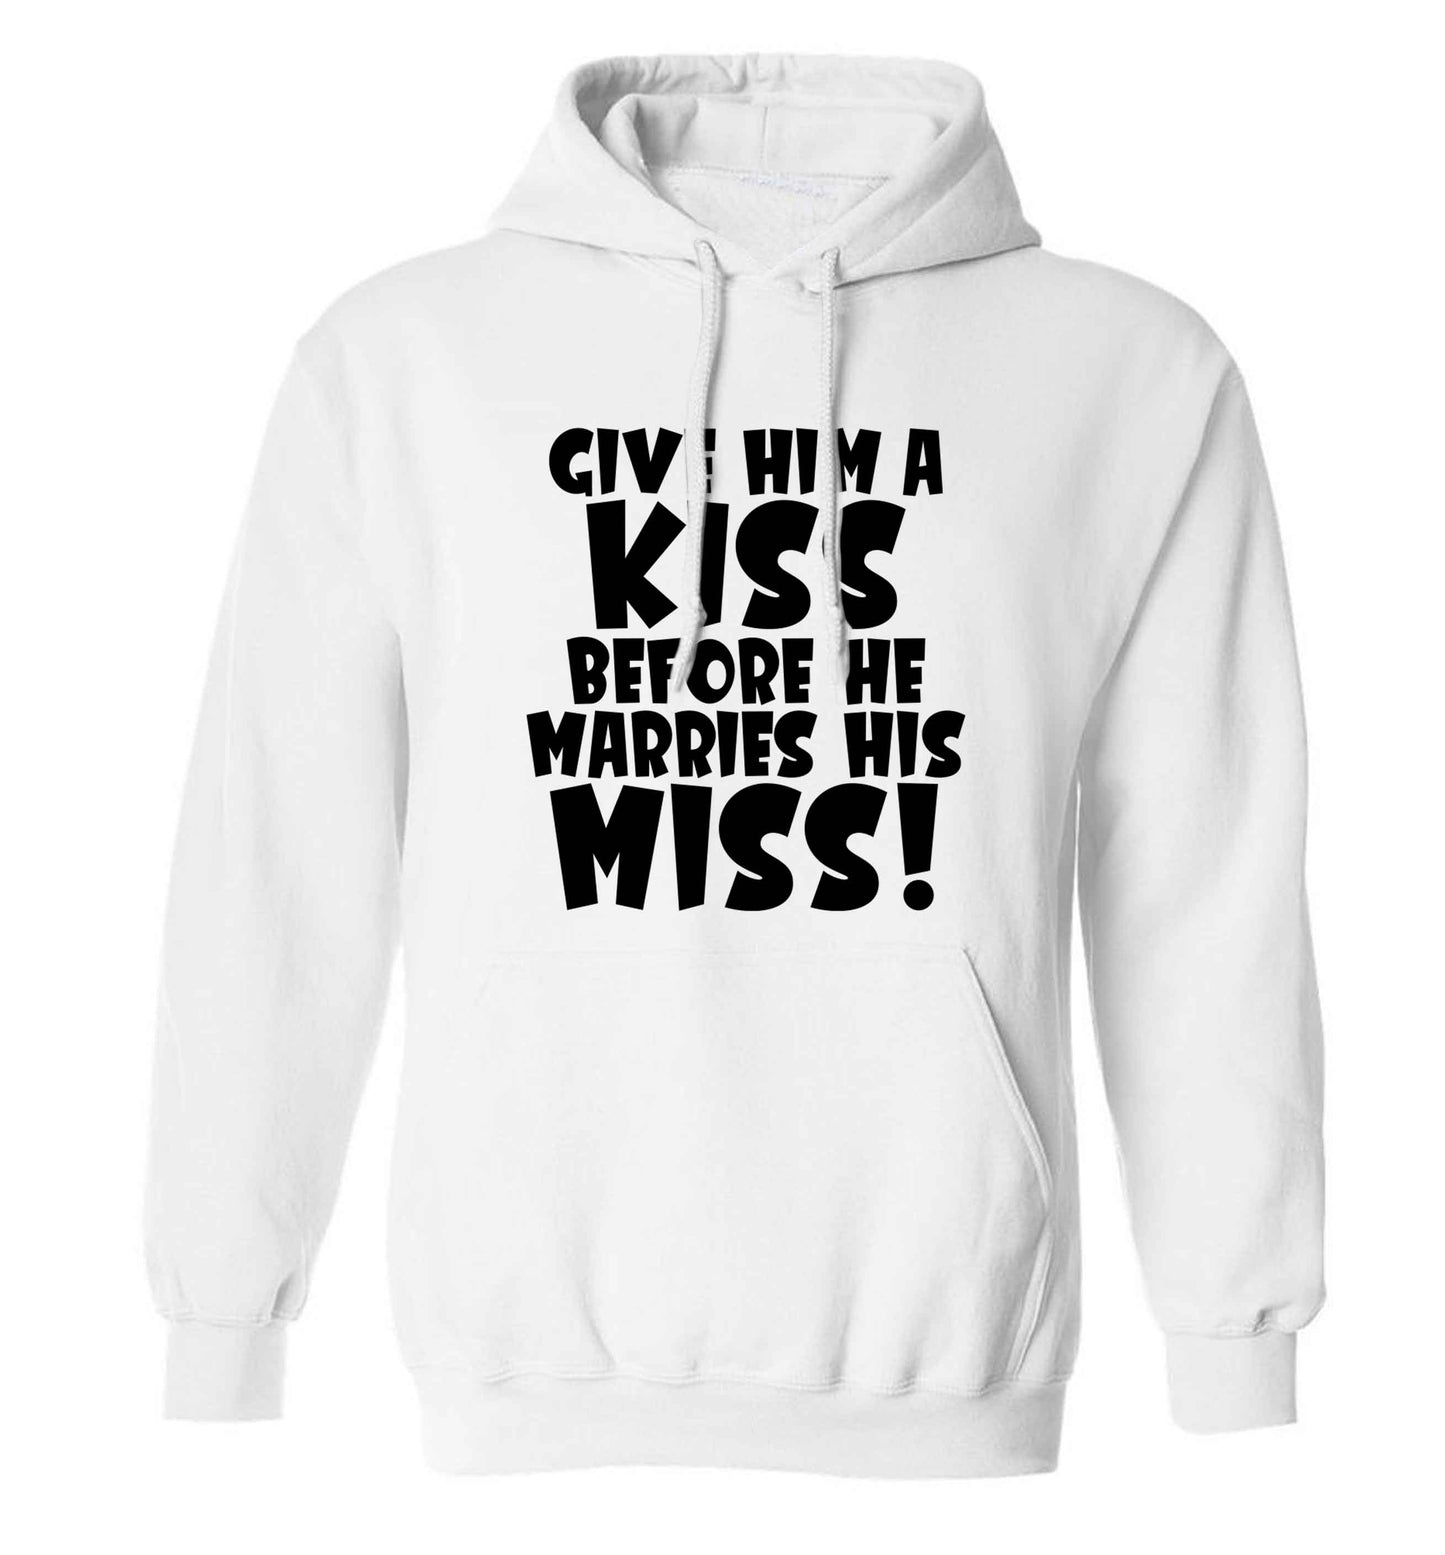 Give him a kiss before he marries his miss adults unisex white hoodie 2XL